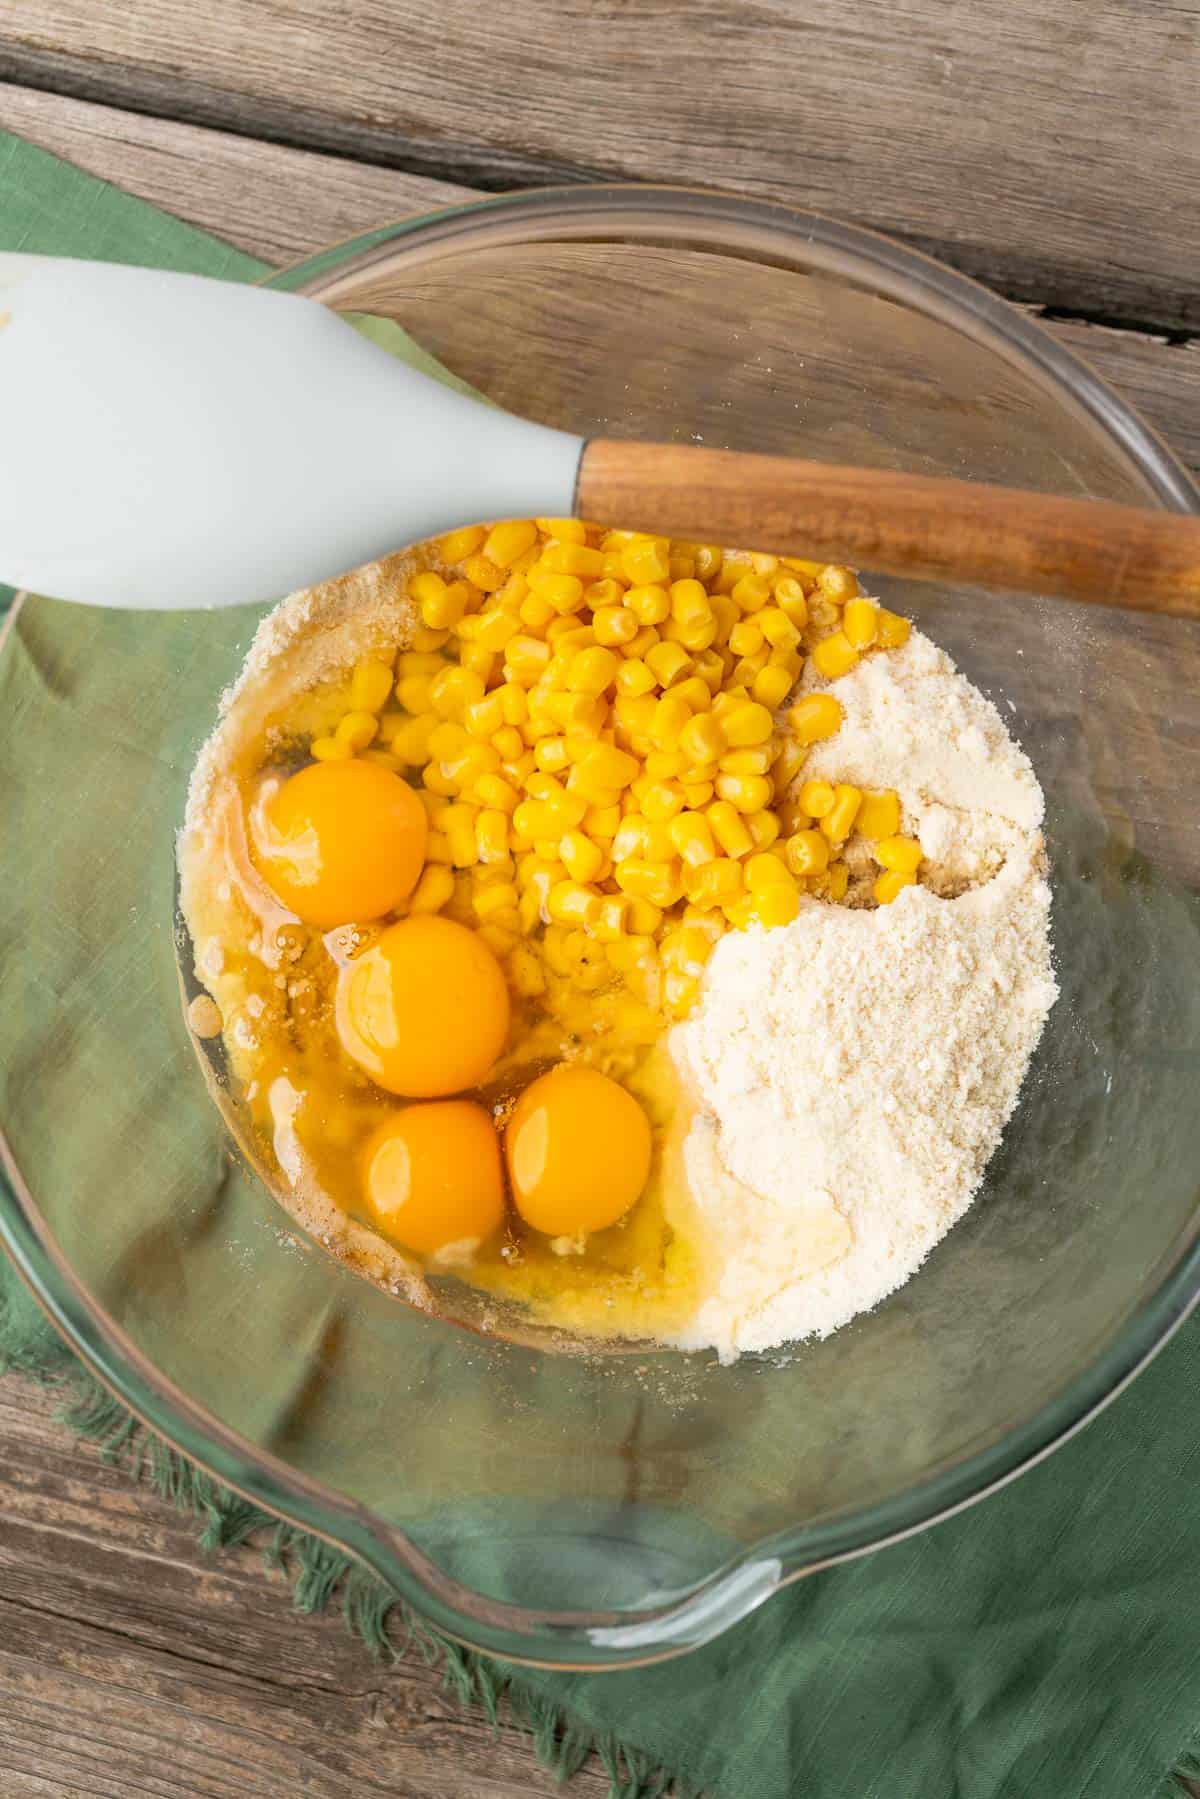 keto cornbread ingredients with whole kernel corn and 4 whole eggs in a glass bowl